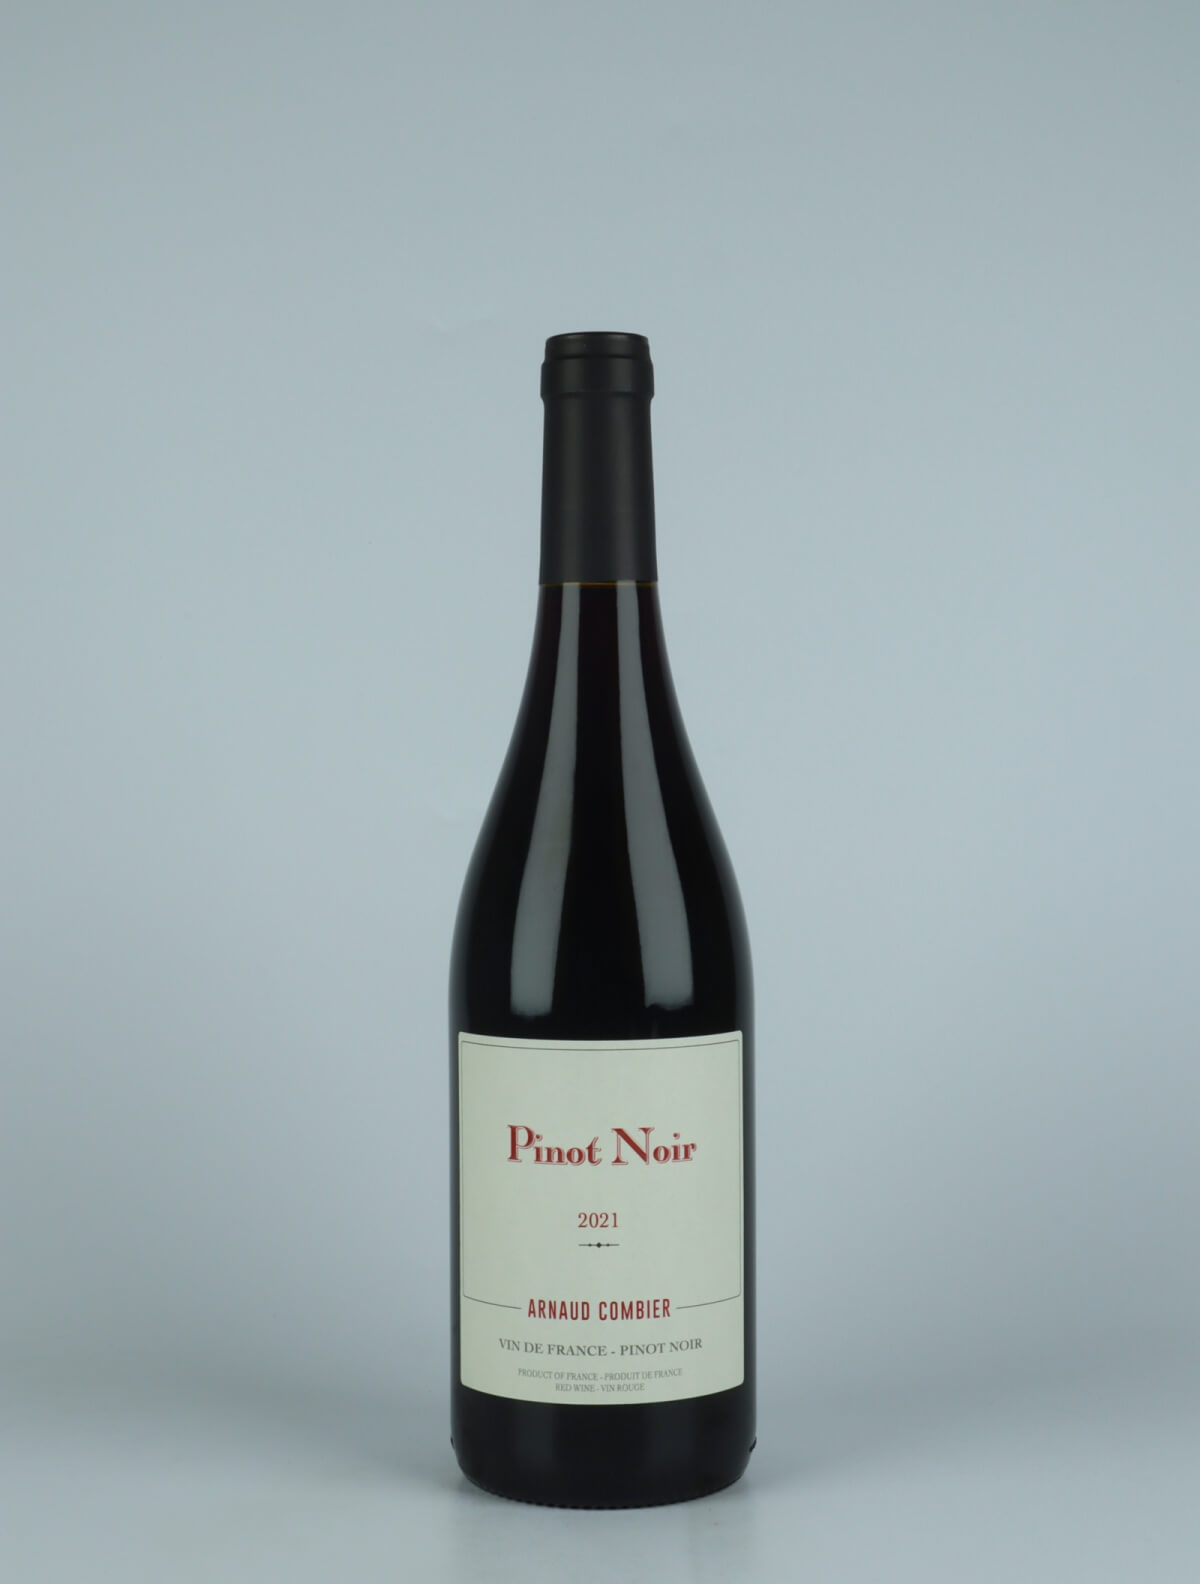 A bottle 2021 Pinot Noir Red wine from Arnaud Combier, Beaujolais in France